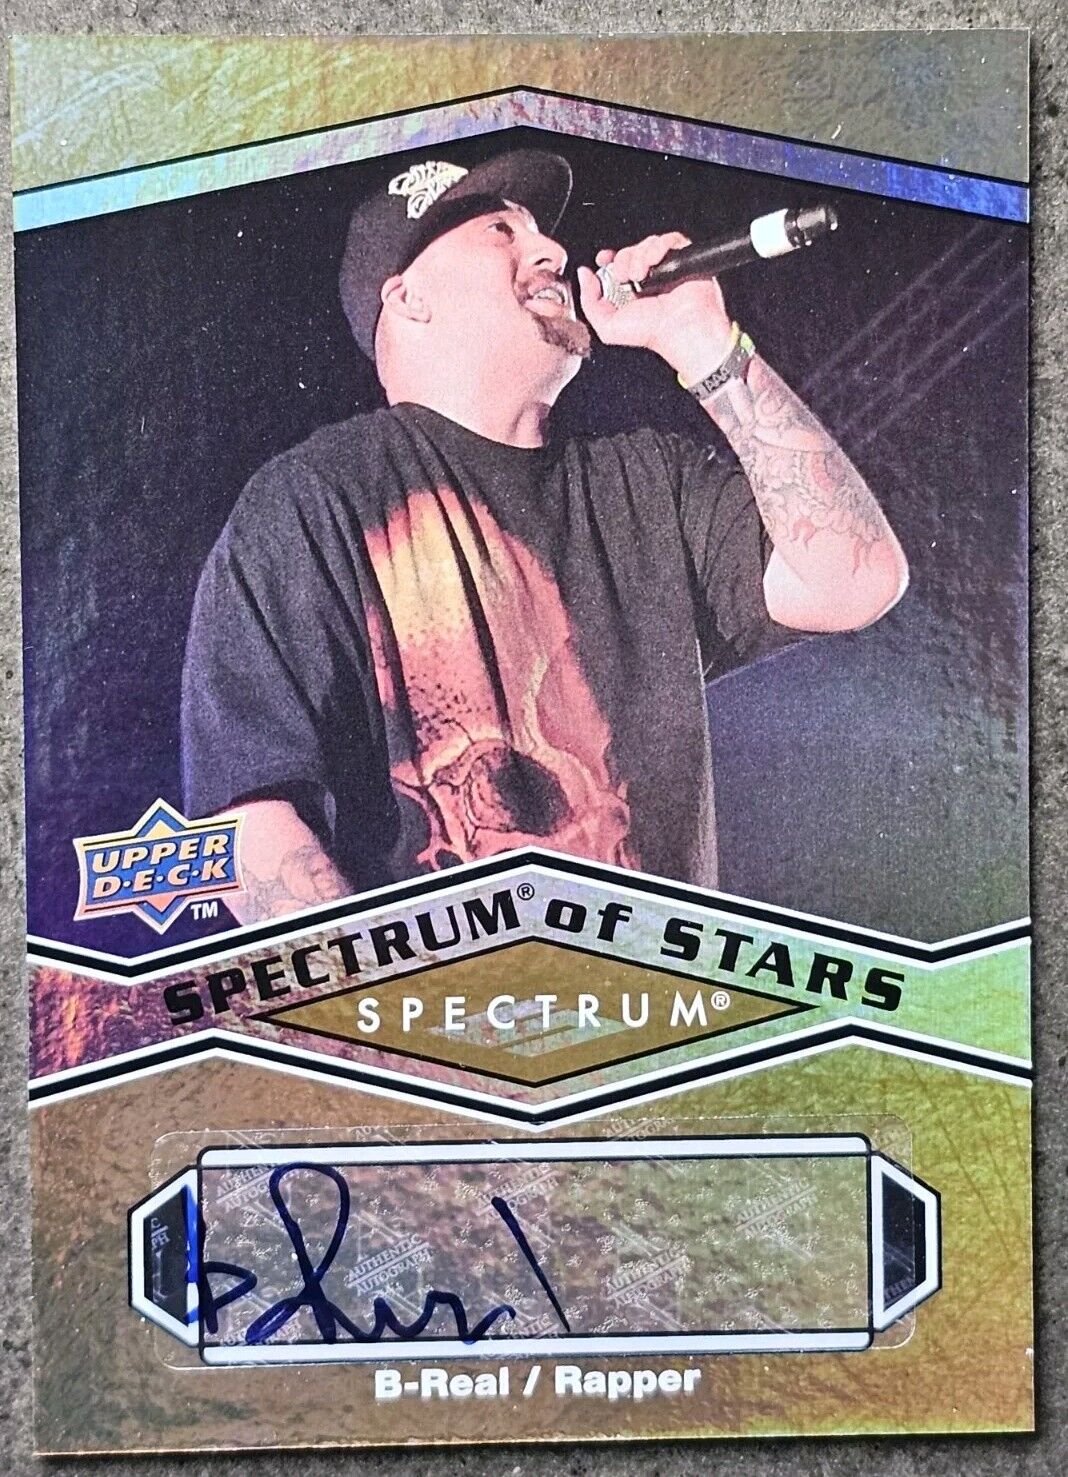 B-Real 2009 Upper Deck Spectrum of Stars Autographed Signed Card - Cypress Hill